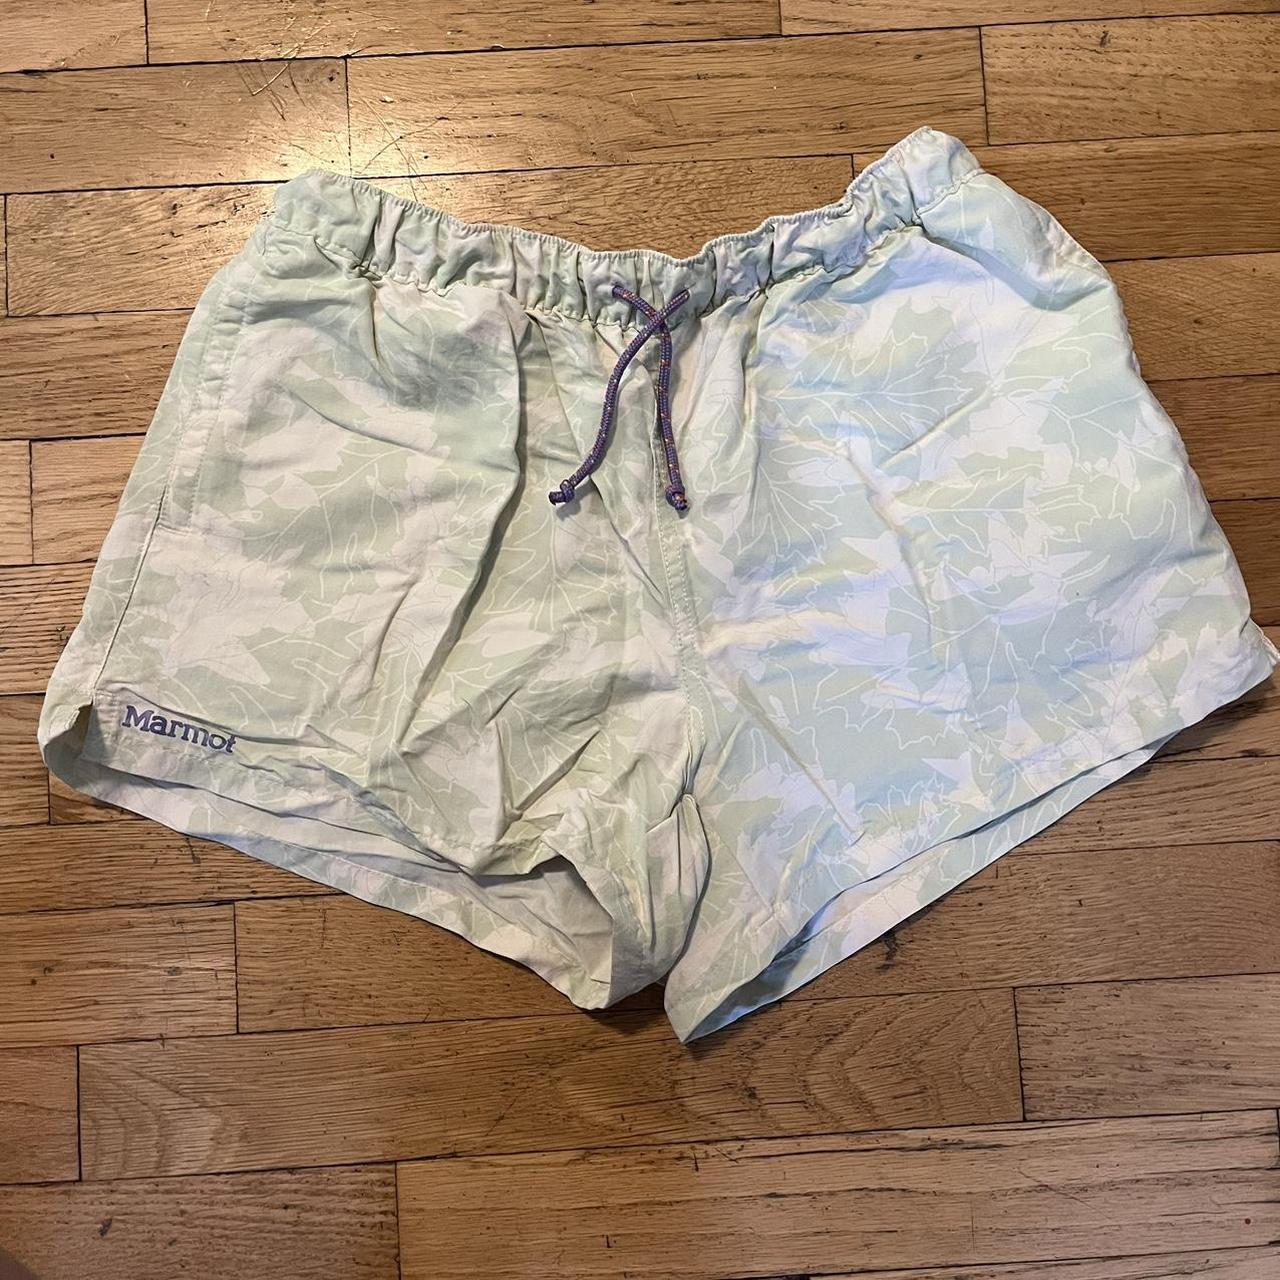 Marmot shorts. Green and white leaf pattern with the - Depop